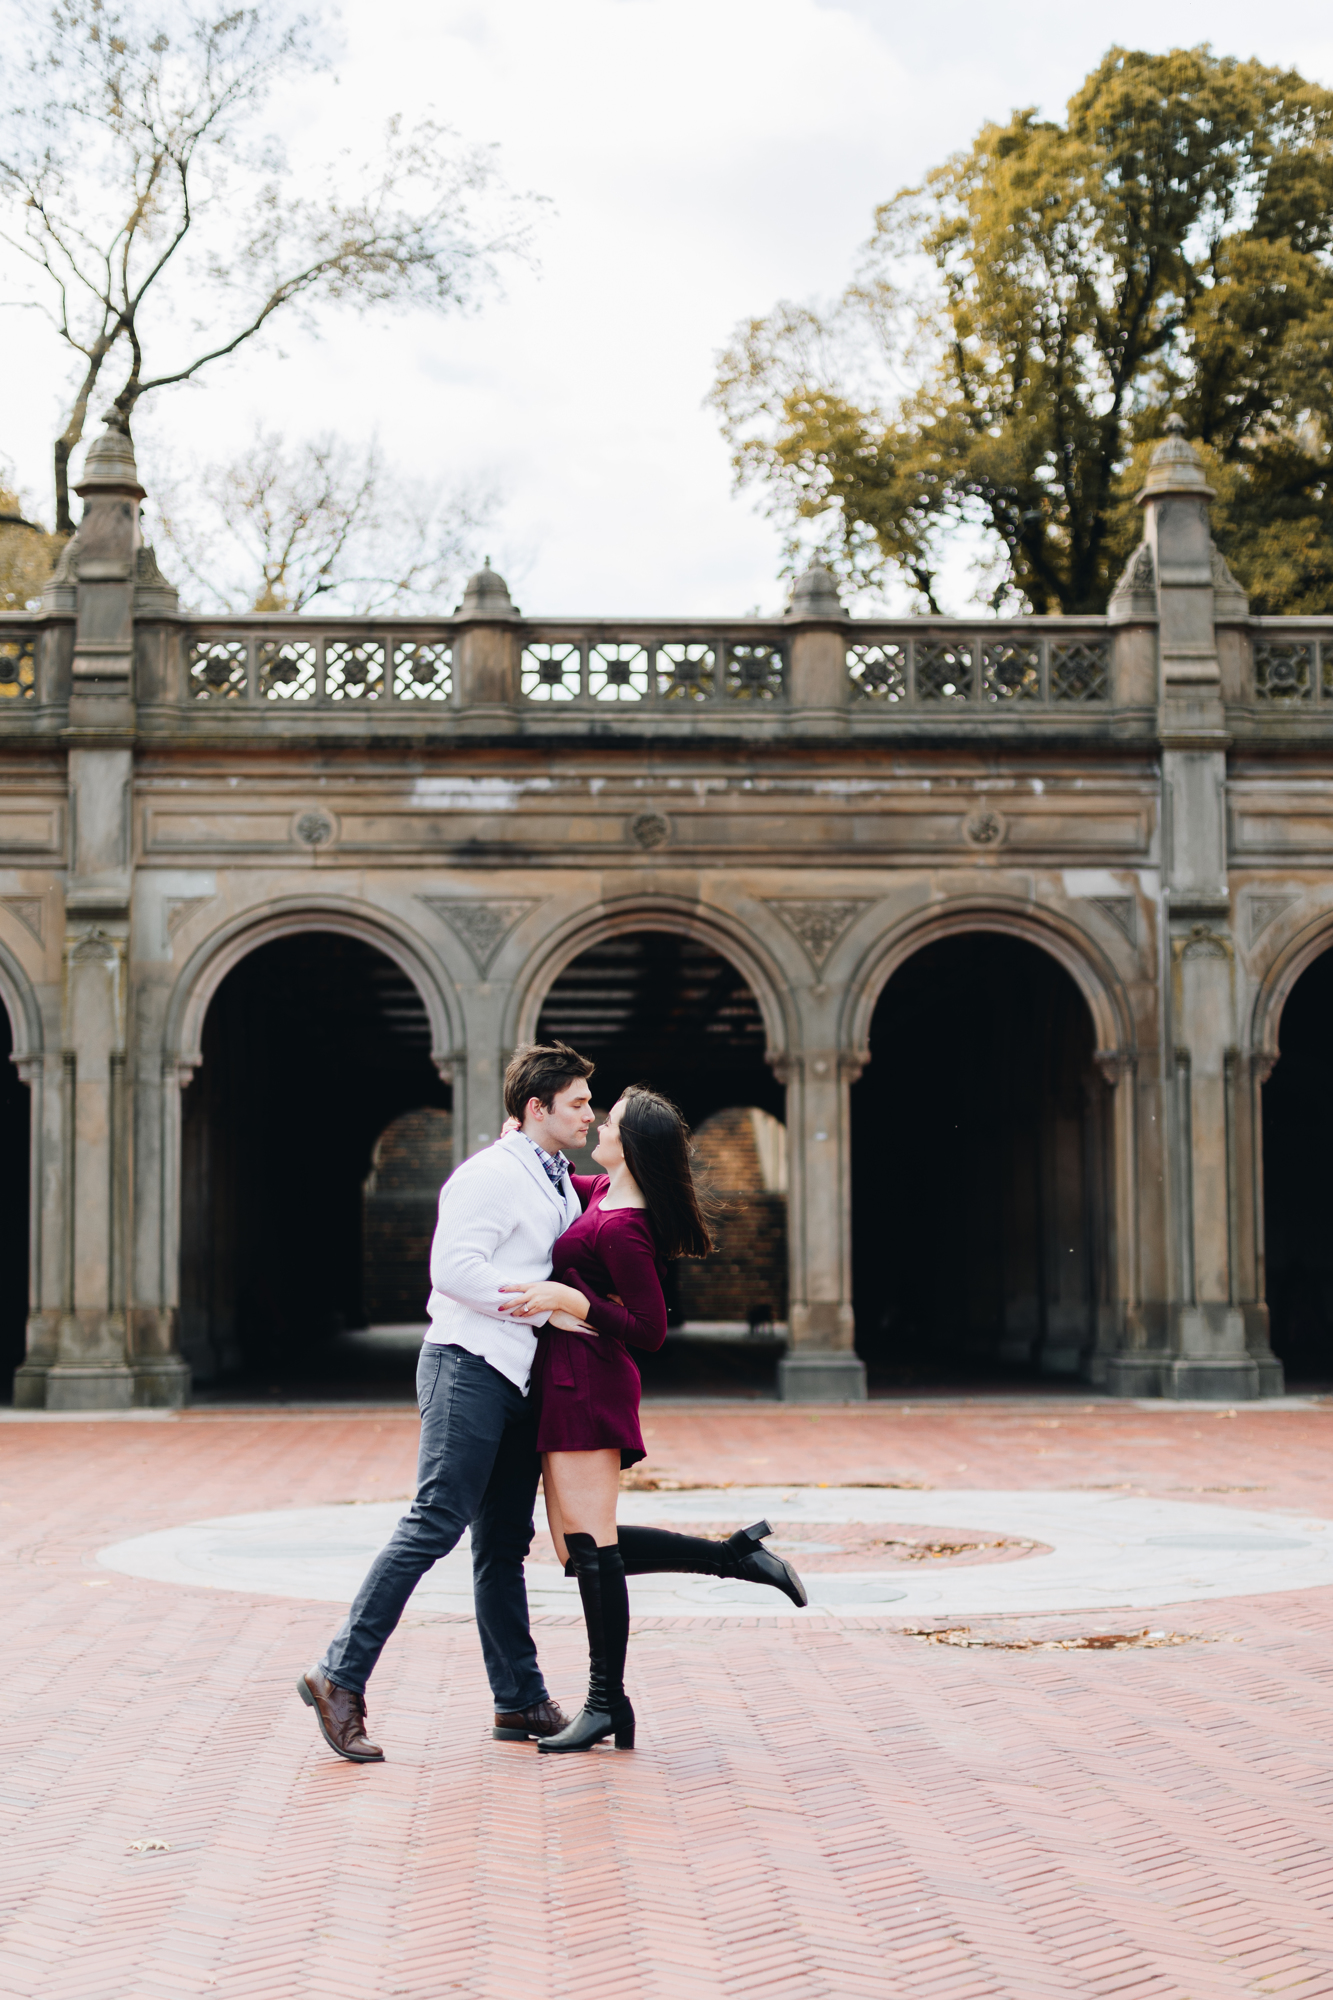 Elegant Fall Engagement Photos in Central Park New York